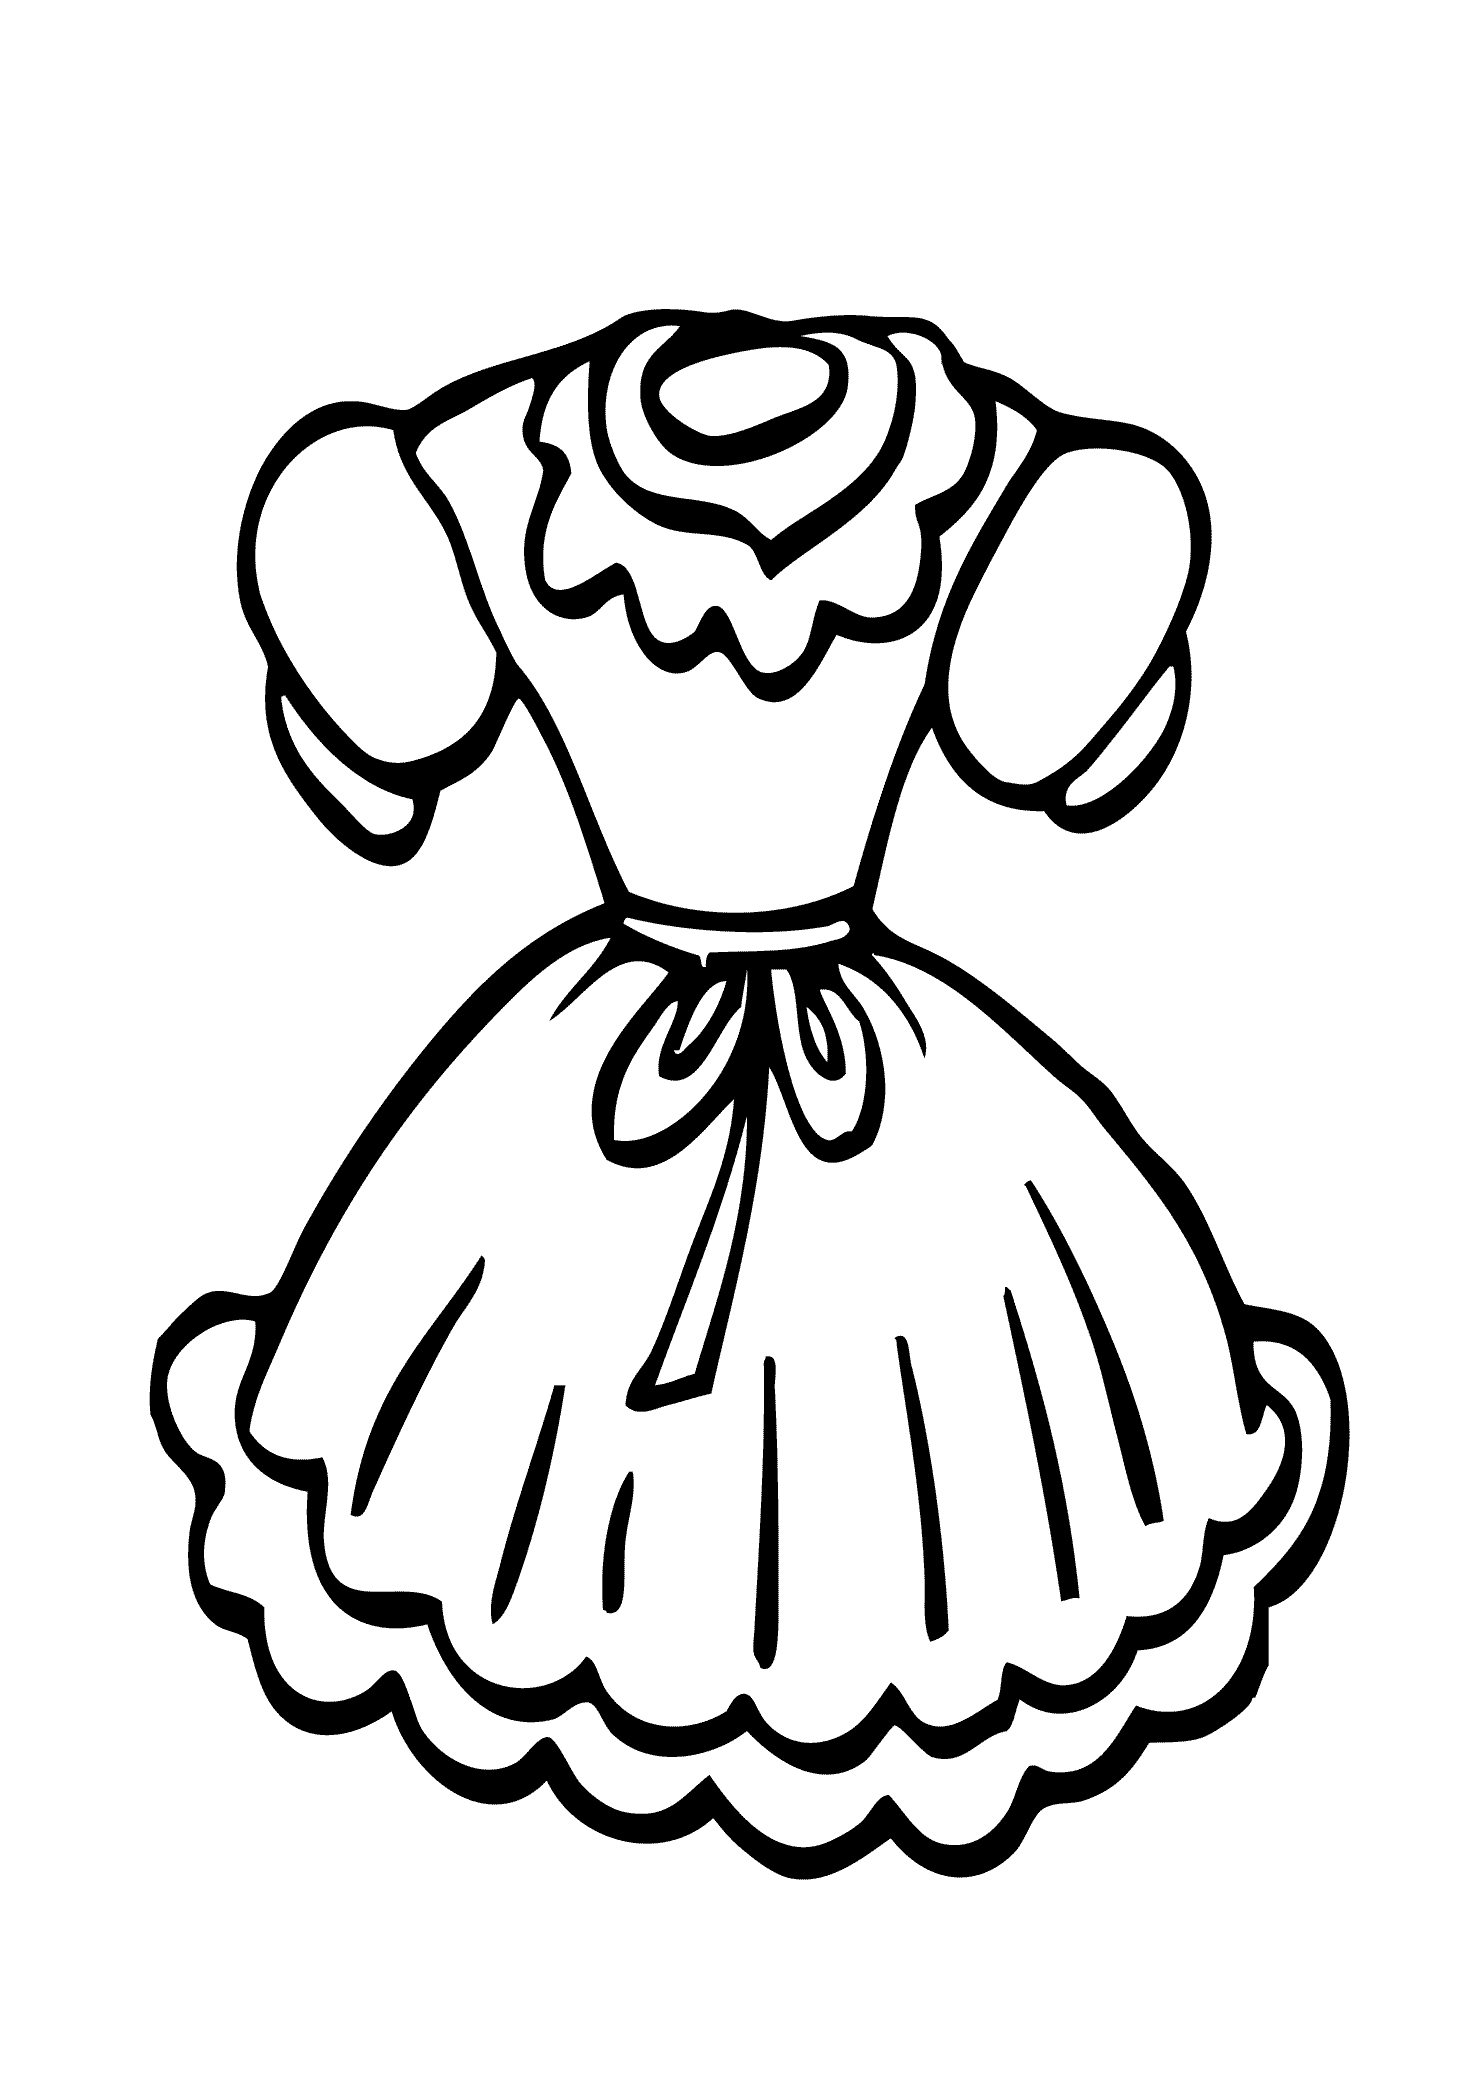 Doll Dress Coloring Page